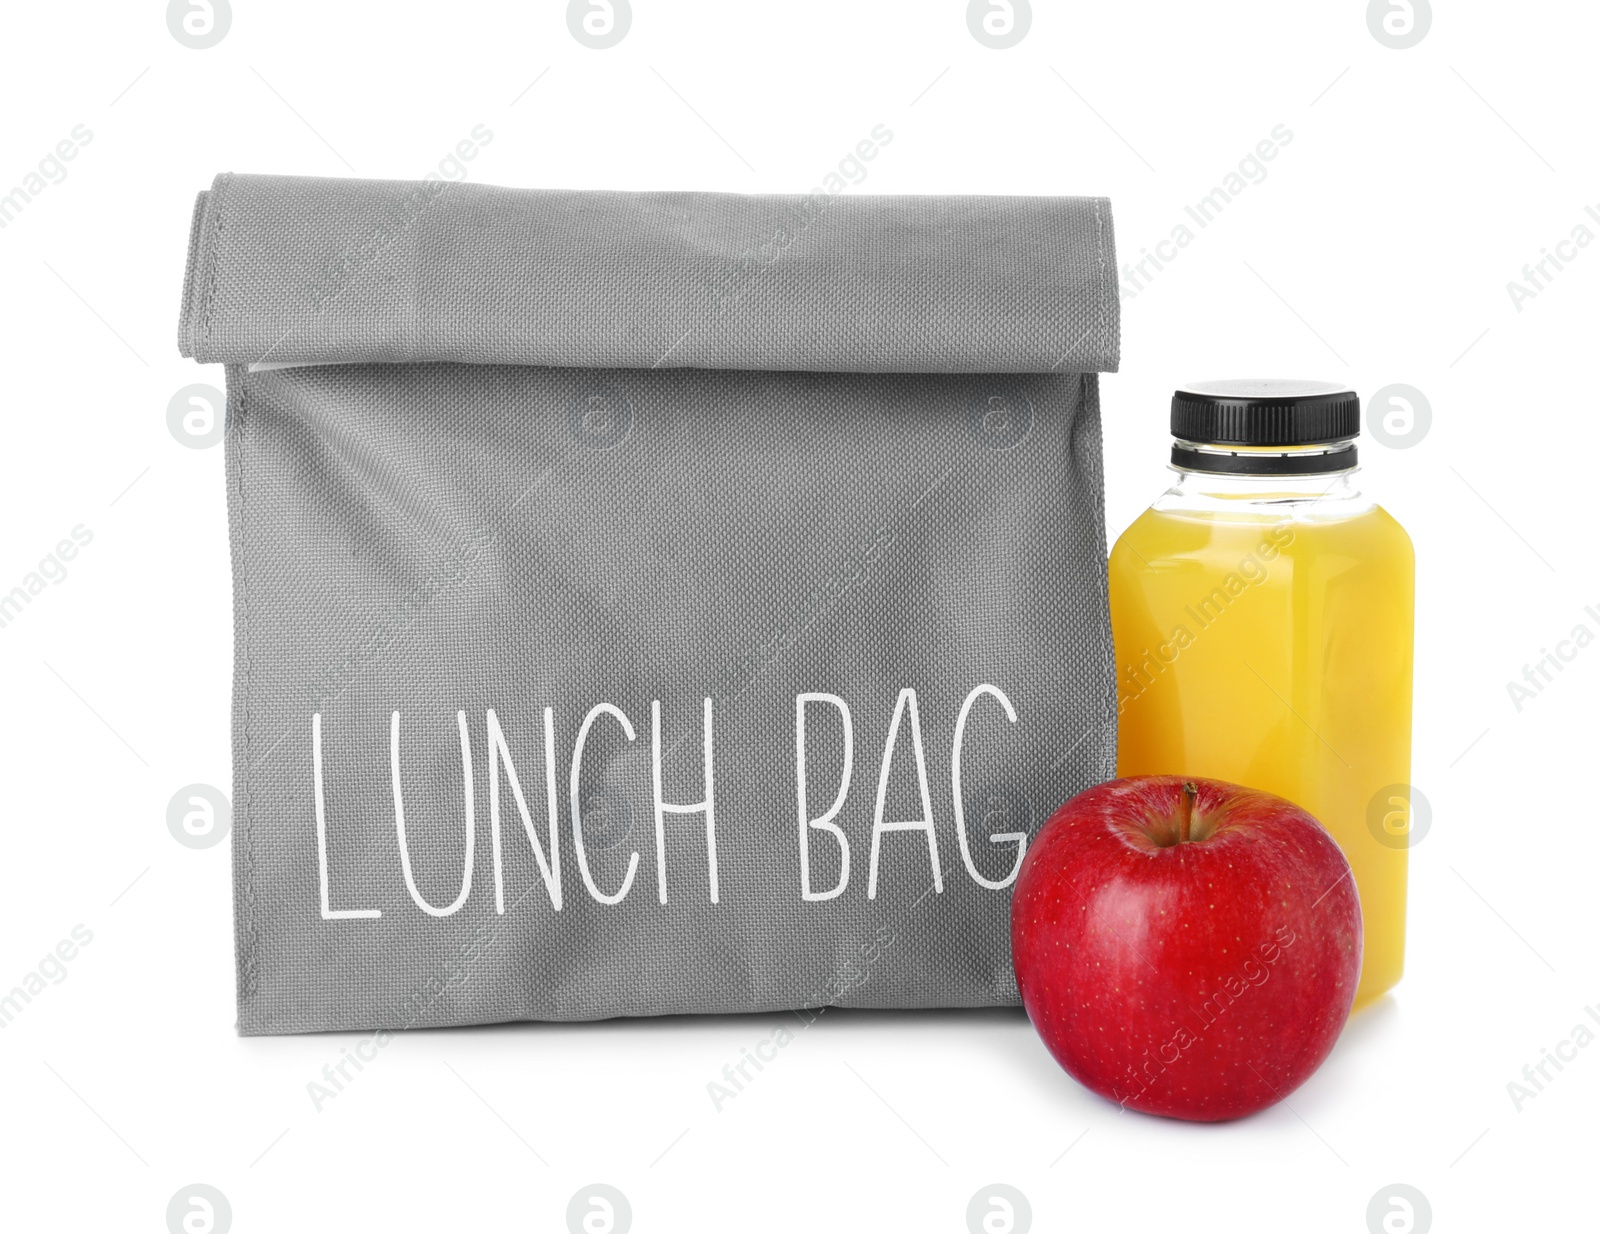 Photo of Lunch bag with healthy food for schoolchild on white background